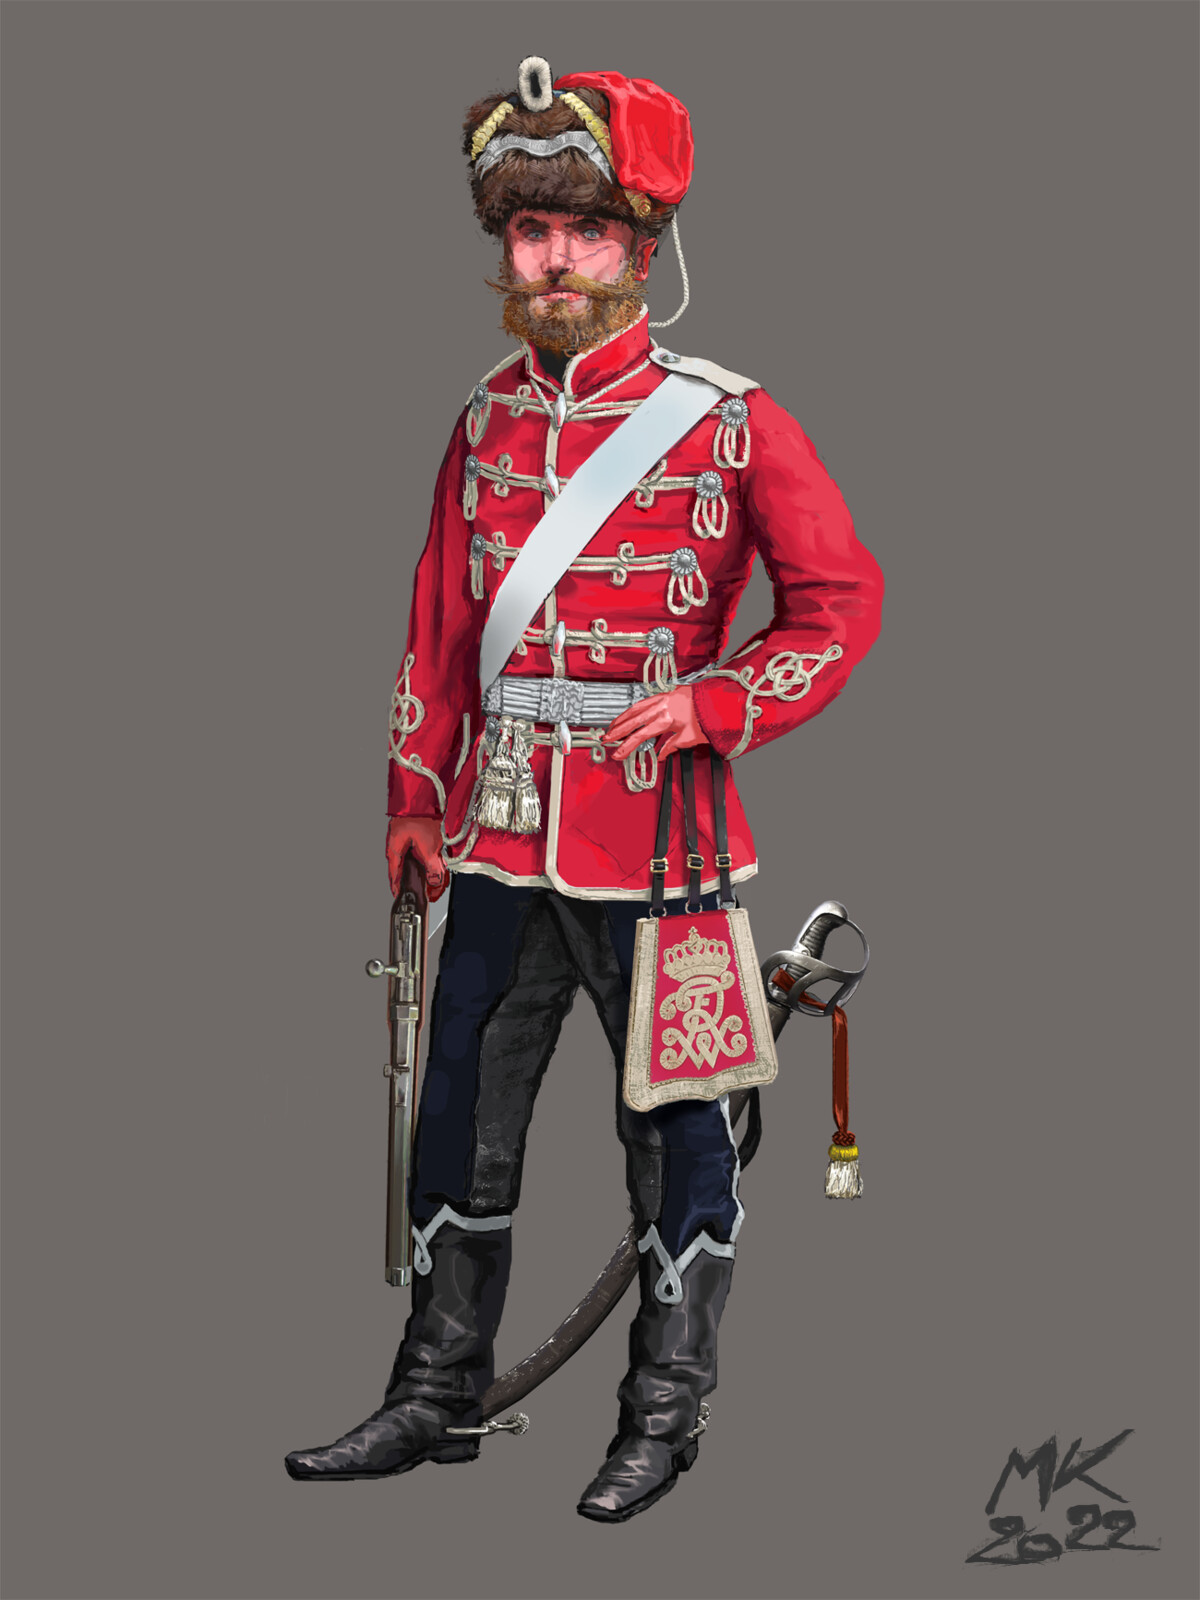 Prussian Hussar from the Franco-Prussian War (1870-1871)